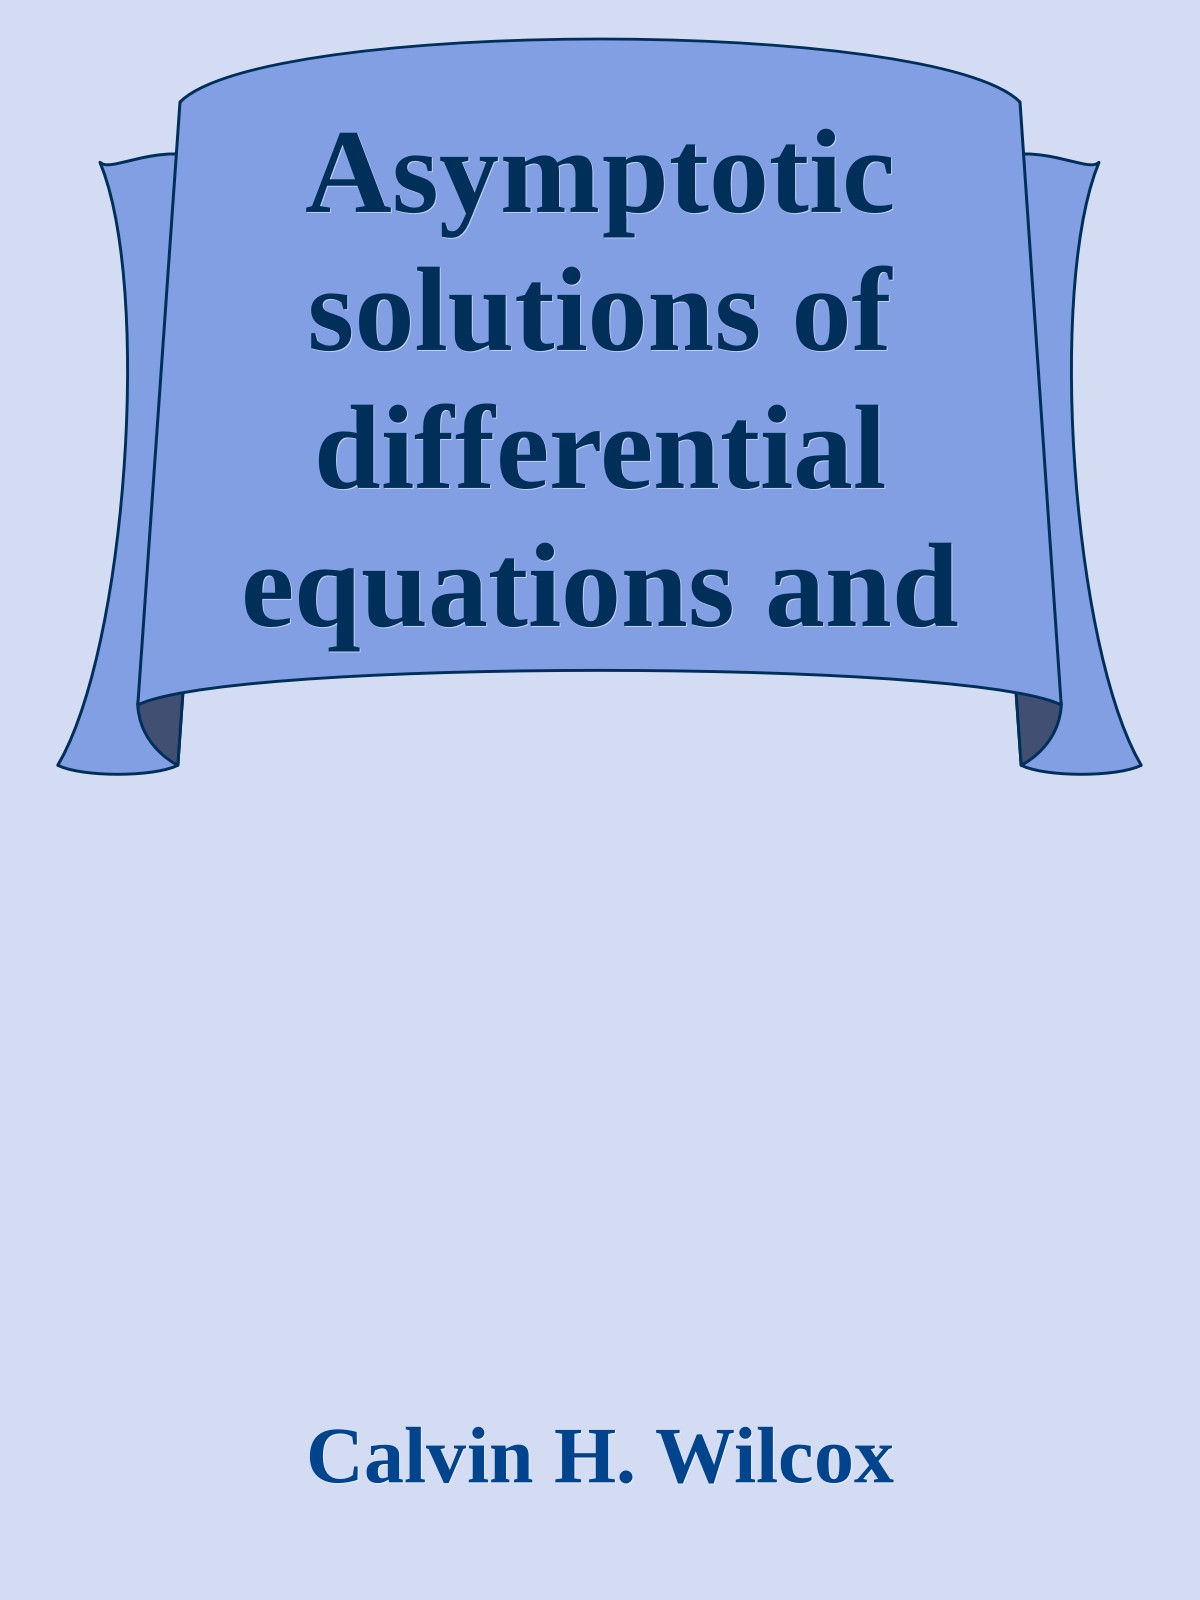 Asymptotic solutions of differential equations and their applications